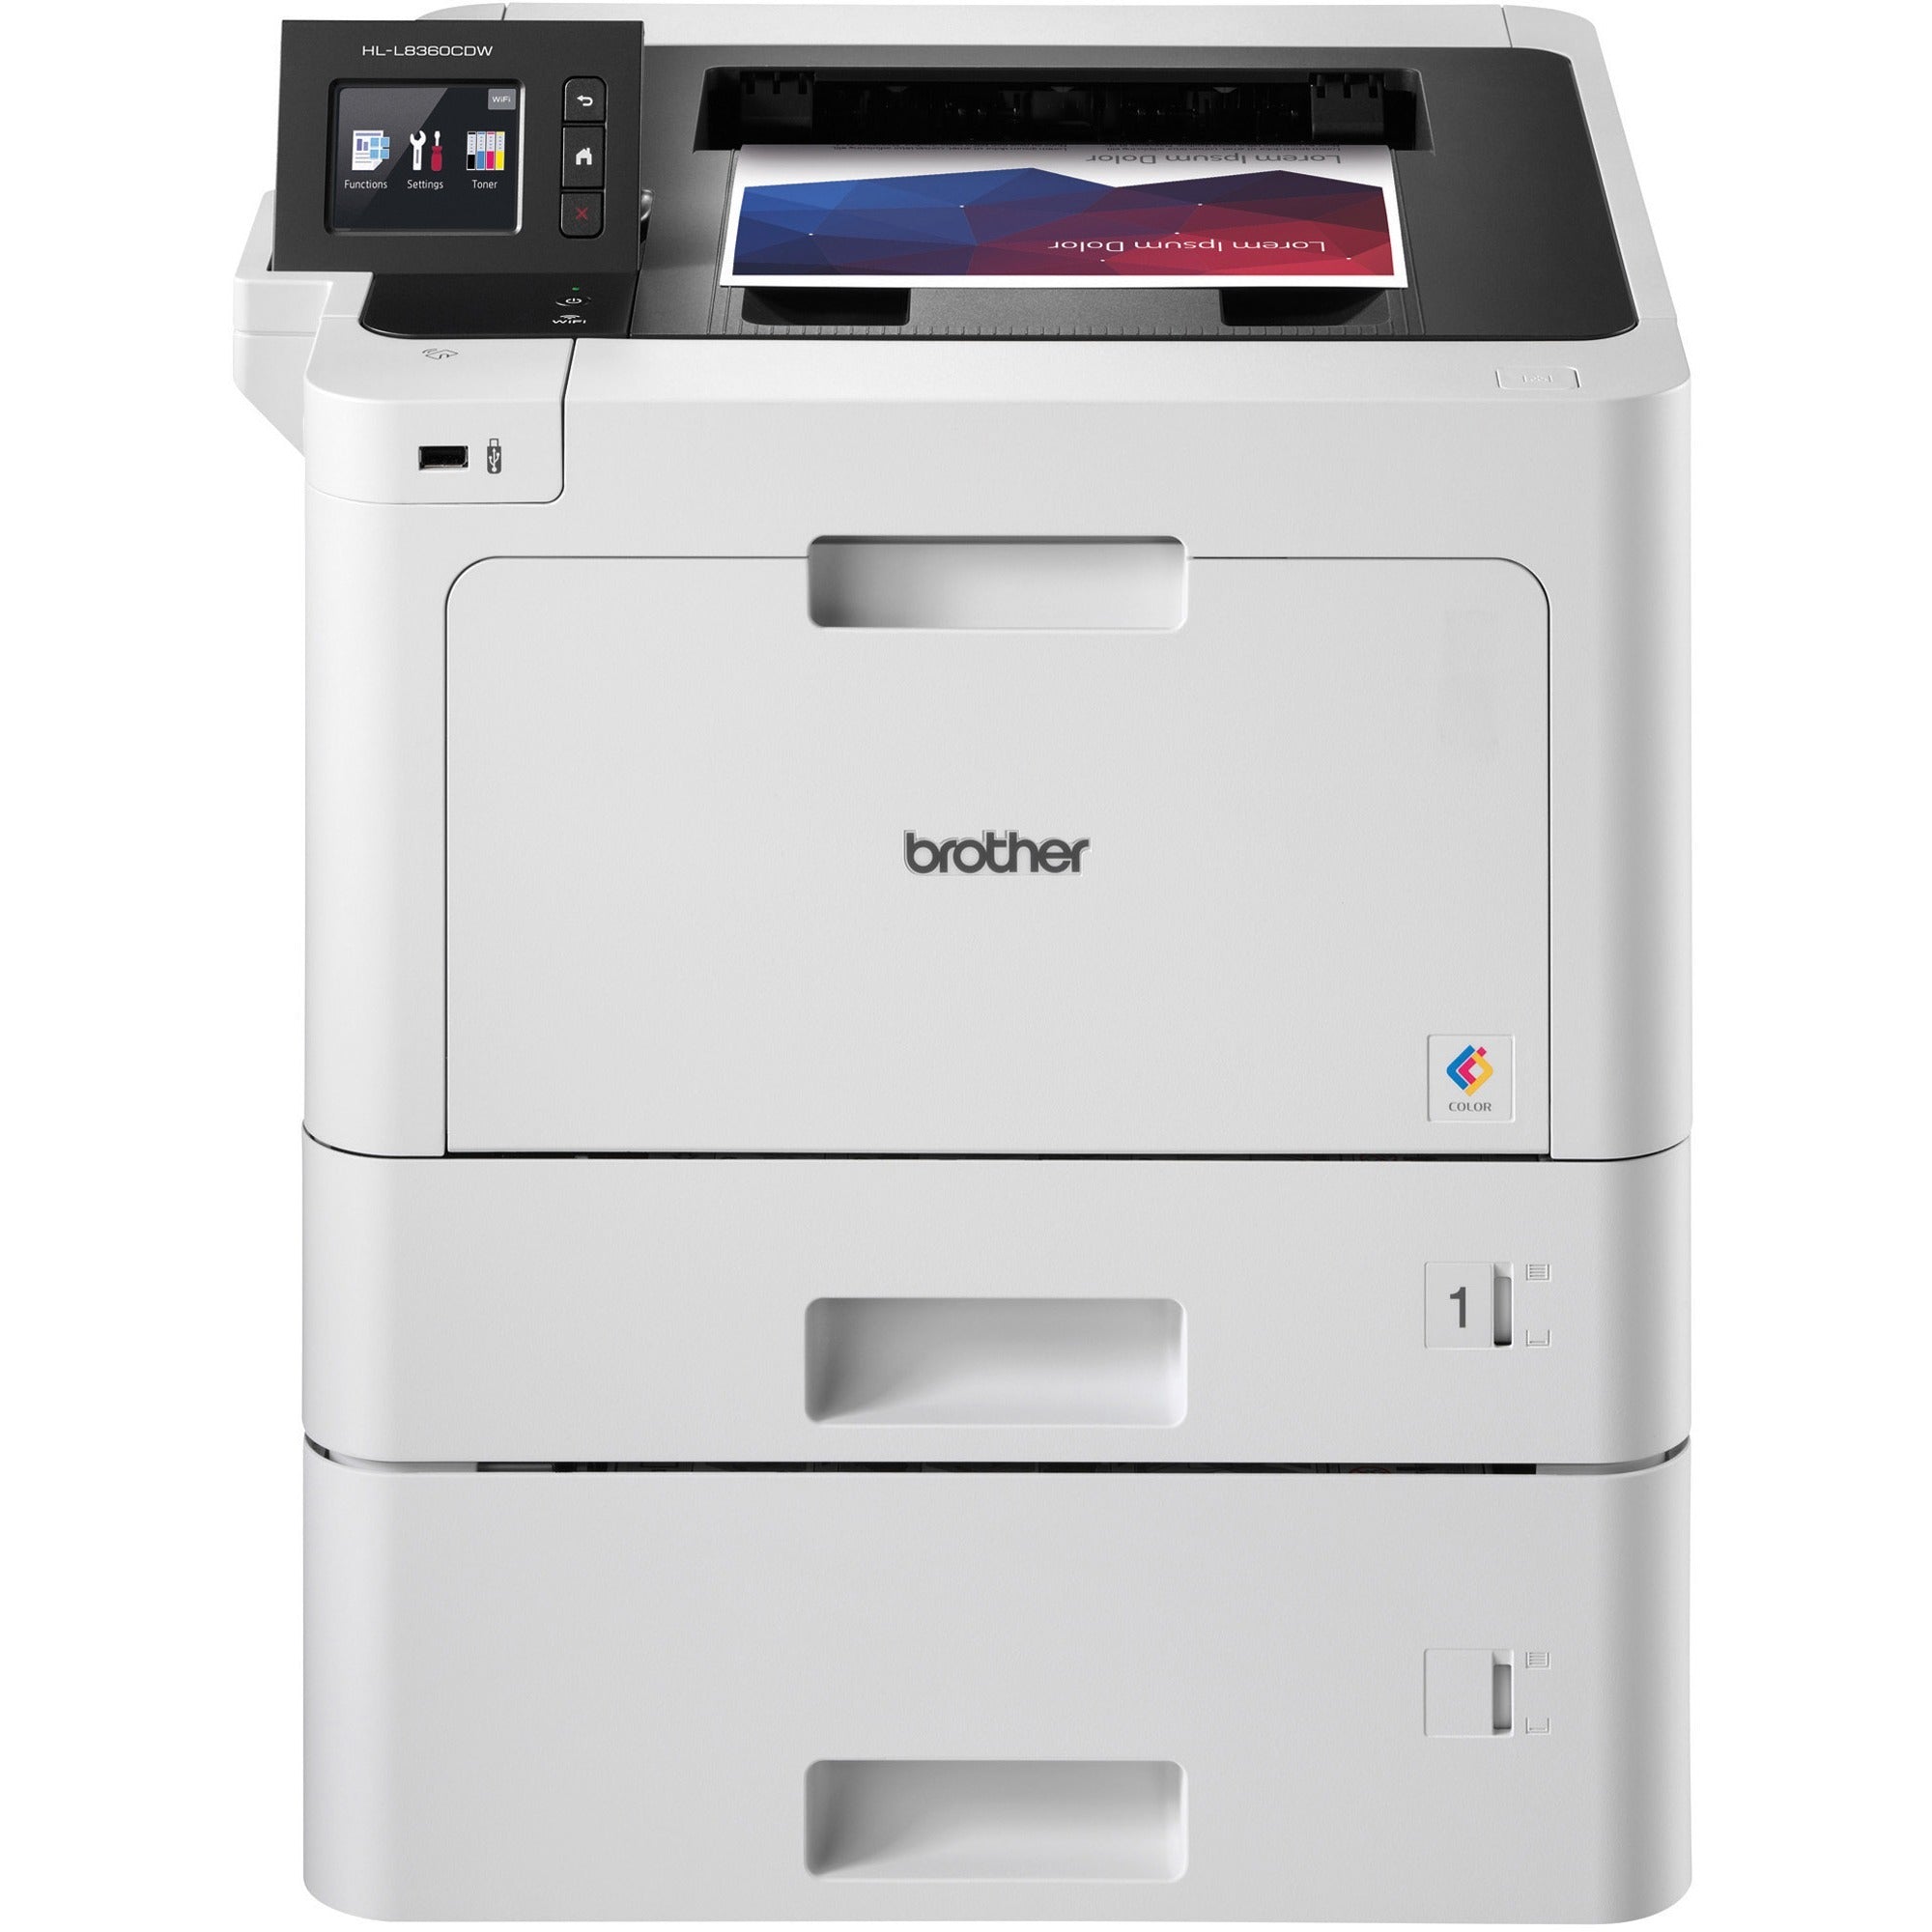 Brother Business Color Laser Printer HL-L8360CDWT - Wireless Networking - Dual Trays - Color Laser Printer - 33 ppm Mono / 33 ppm Color - Automatic Duplex Print - Ethernet - Wireless LAN - USB - 2